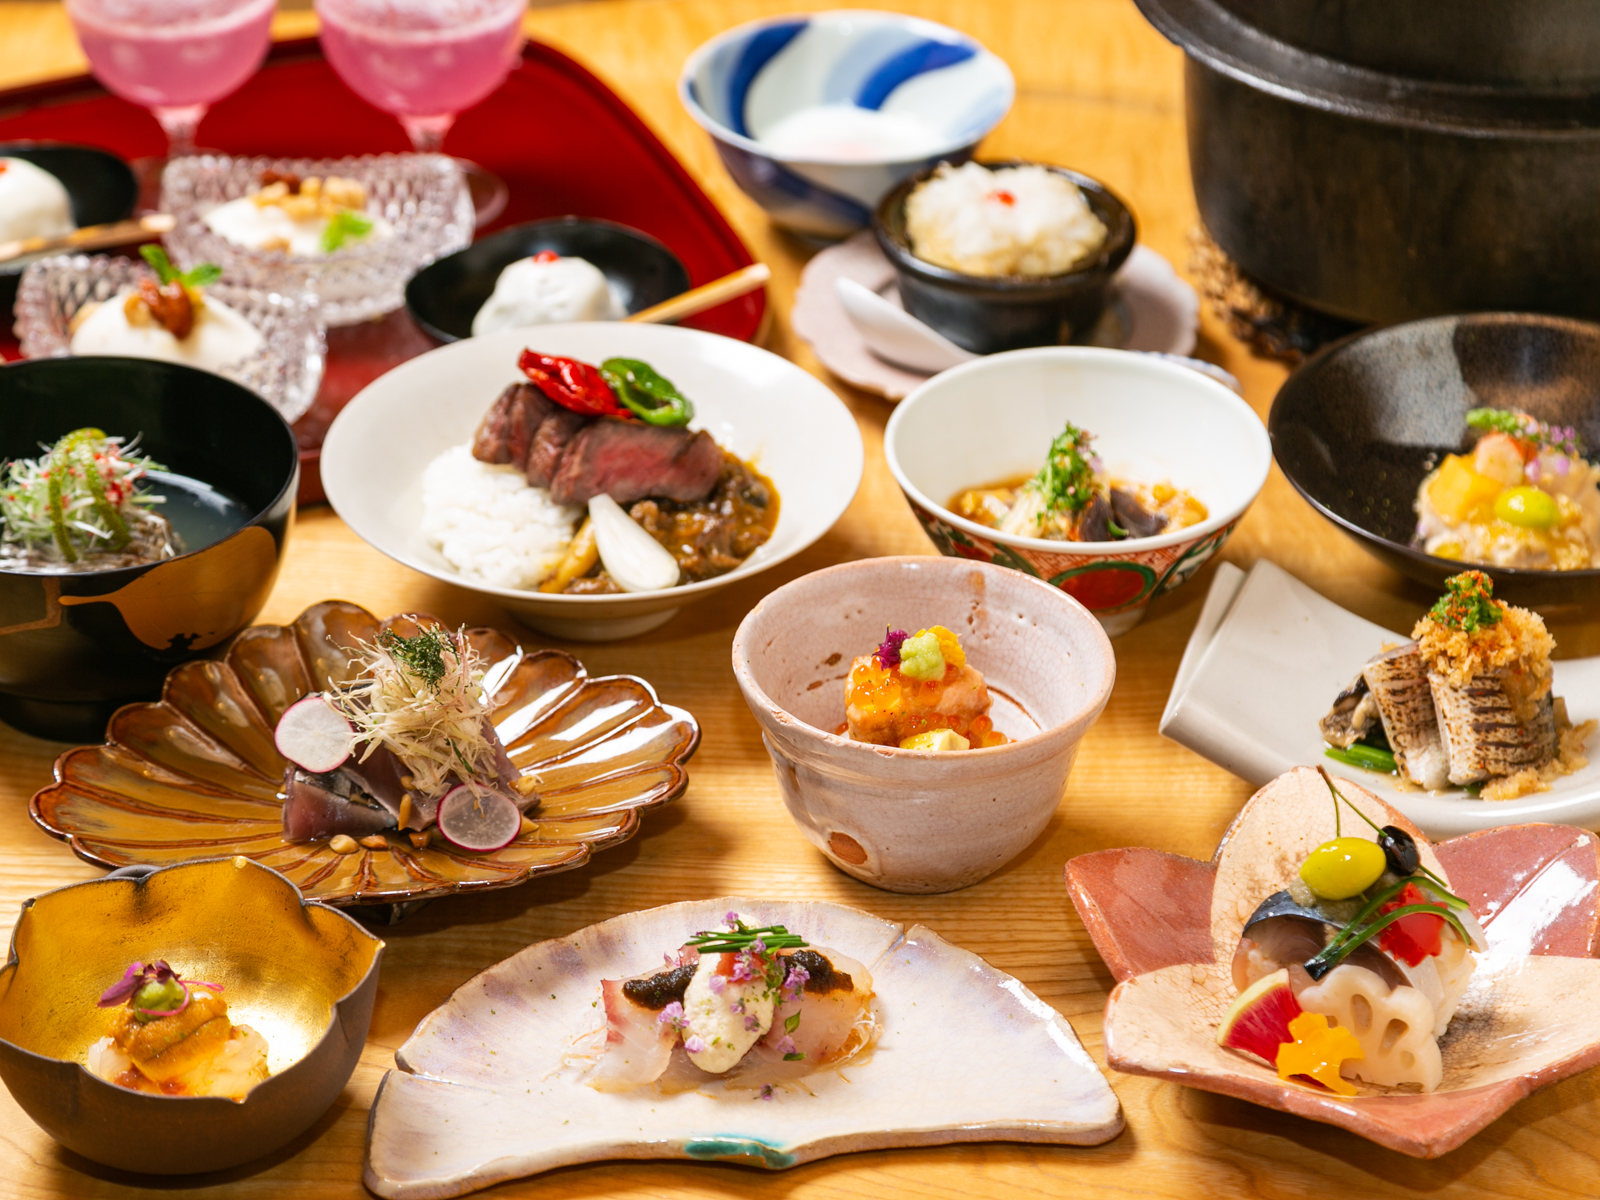 Dinner Set Course for October, 2020 The Second Year of The Reiwa Era